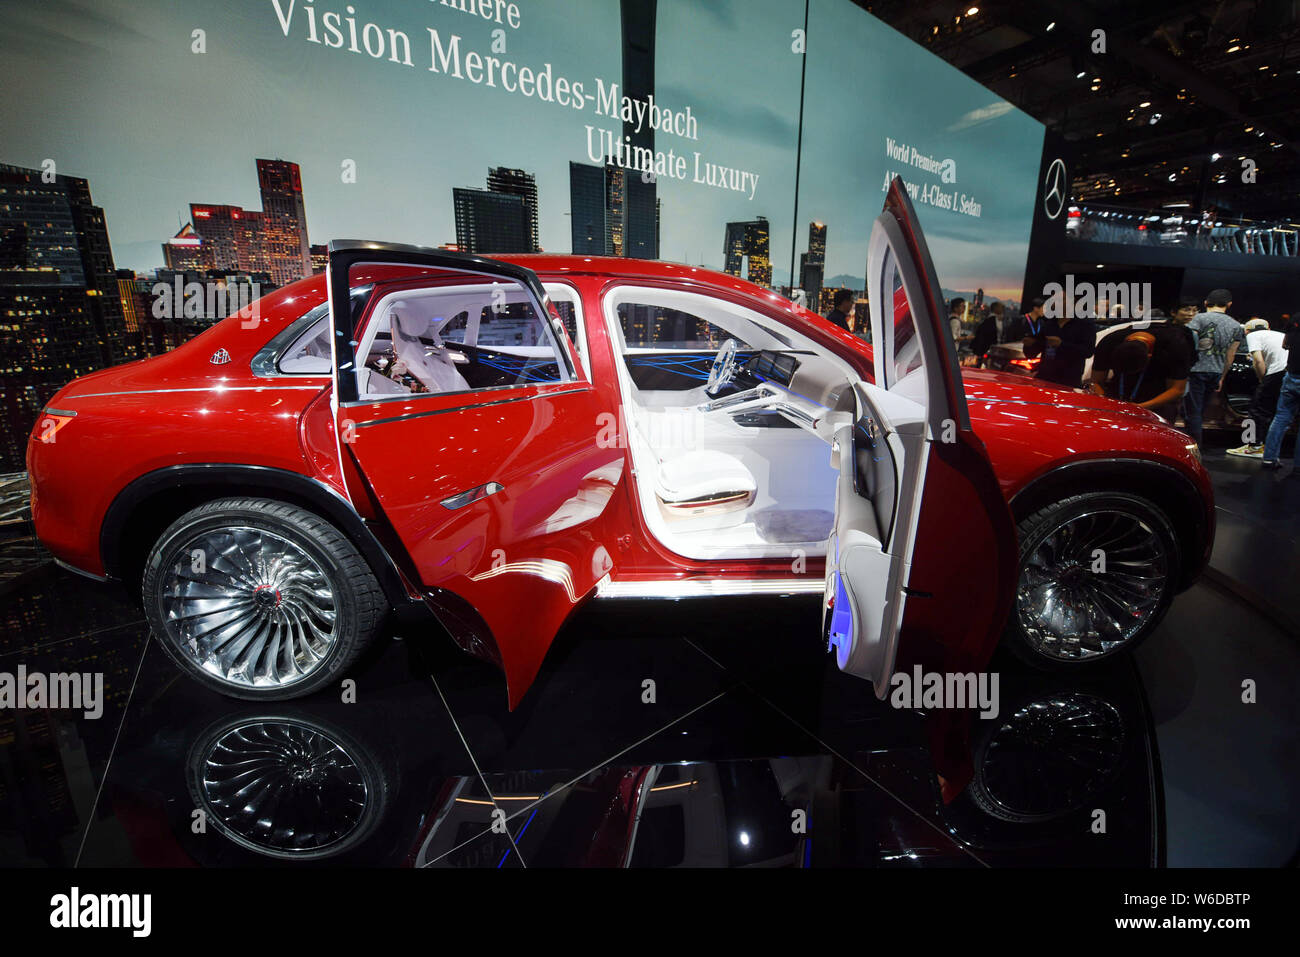 A Vision Mercedes-Maybach Ultimate Luxury concept car is on display during the 15th Beijing International Automotive Exhibition, also known as Auto Ch Stock Photo